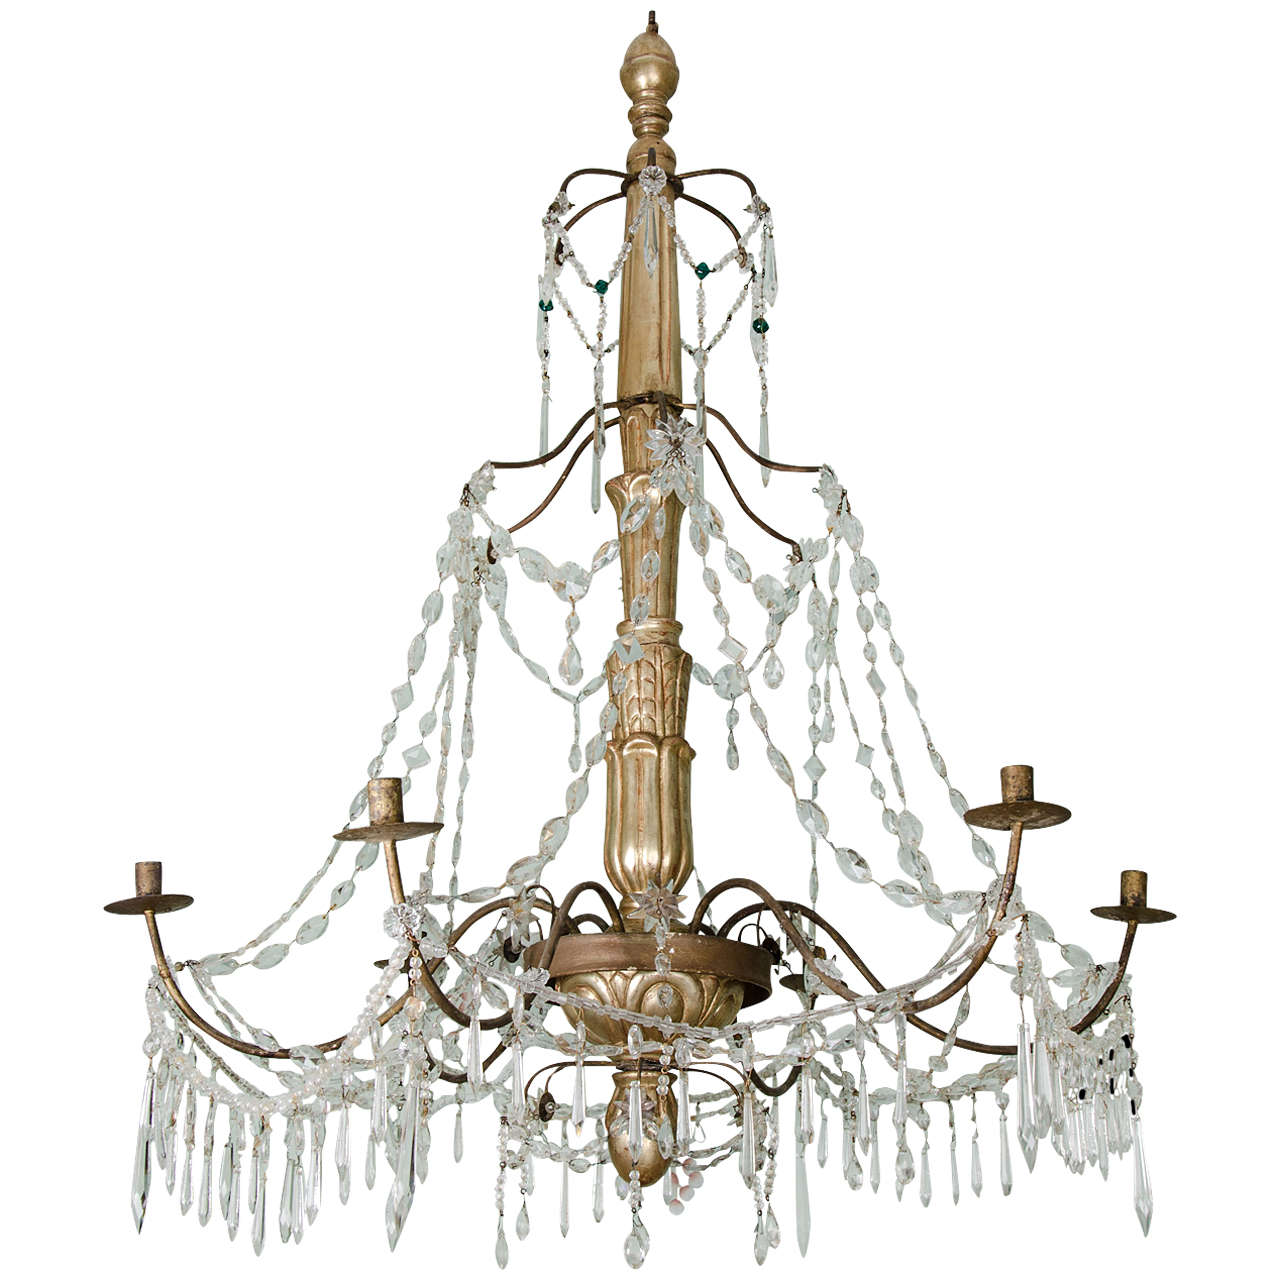 Large-Scale 18th Century Genovese Italian Giltwood Chandelier